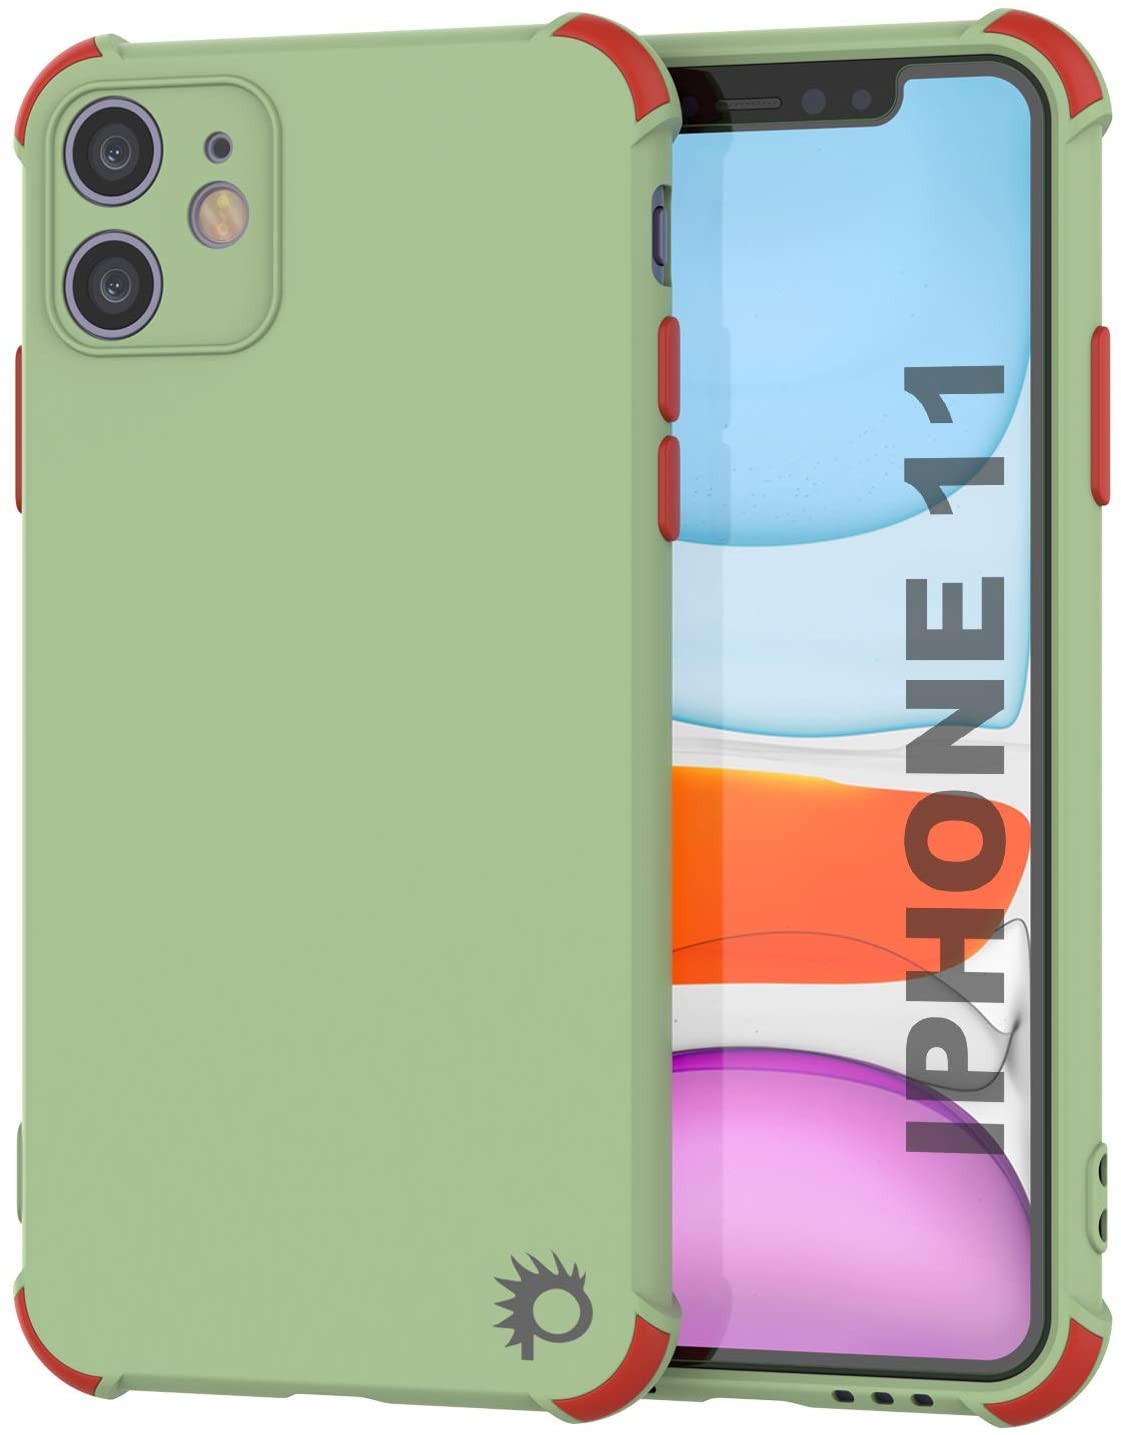 Punkcase Protective & Lightweight TPU Case [Sunshine Series] for iPhone 11 [Light Green]